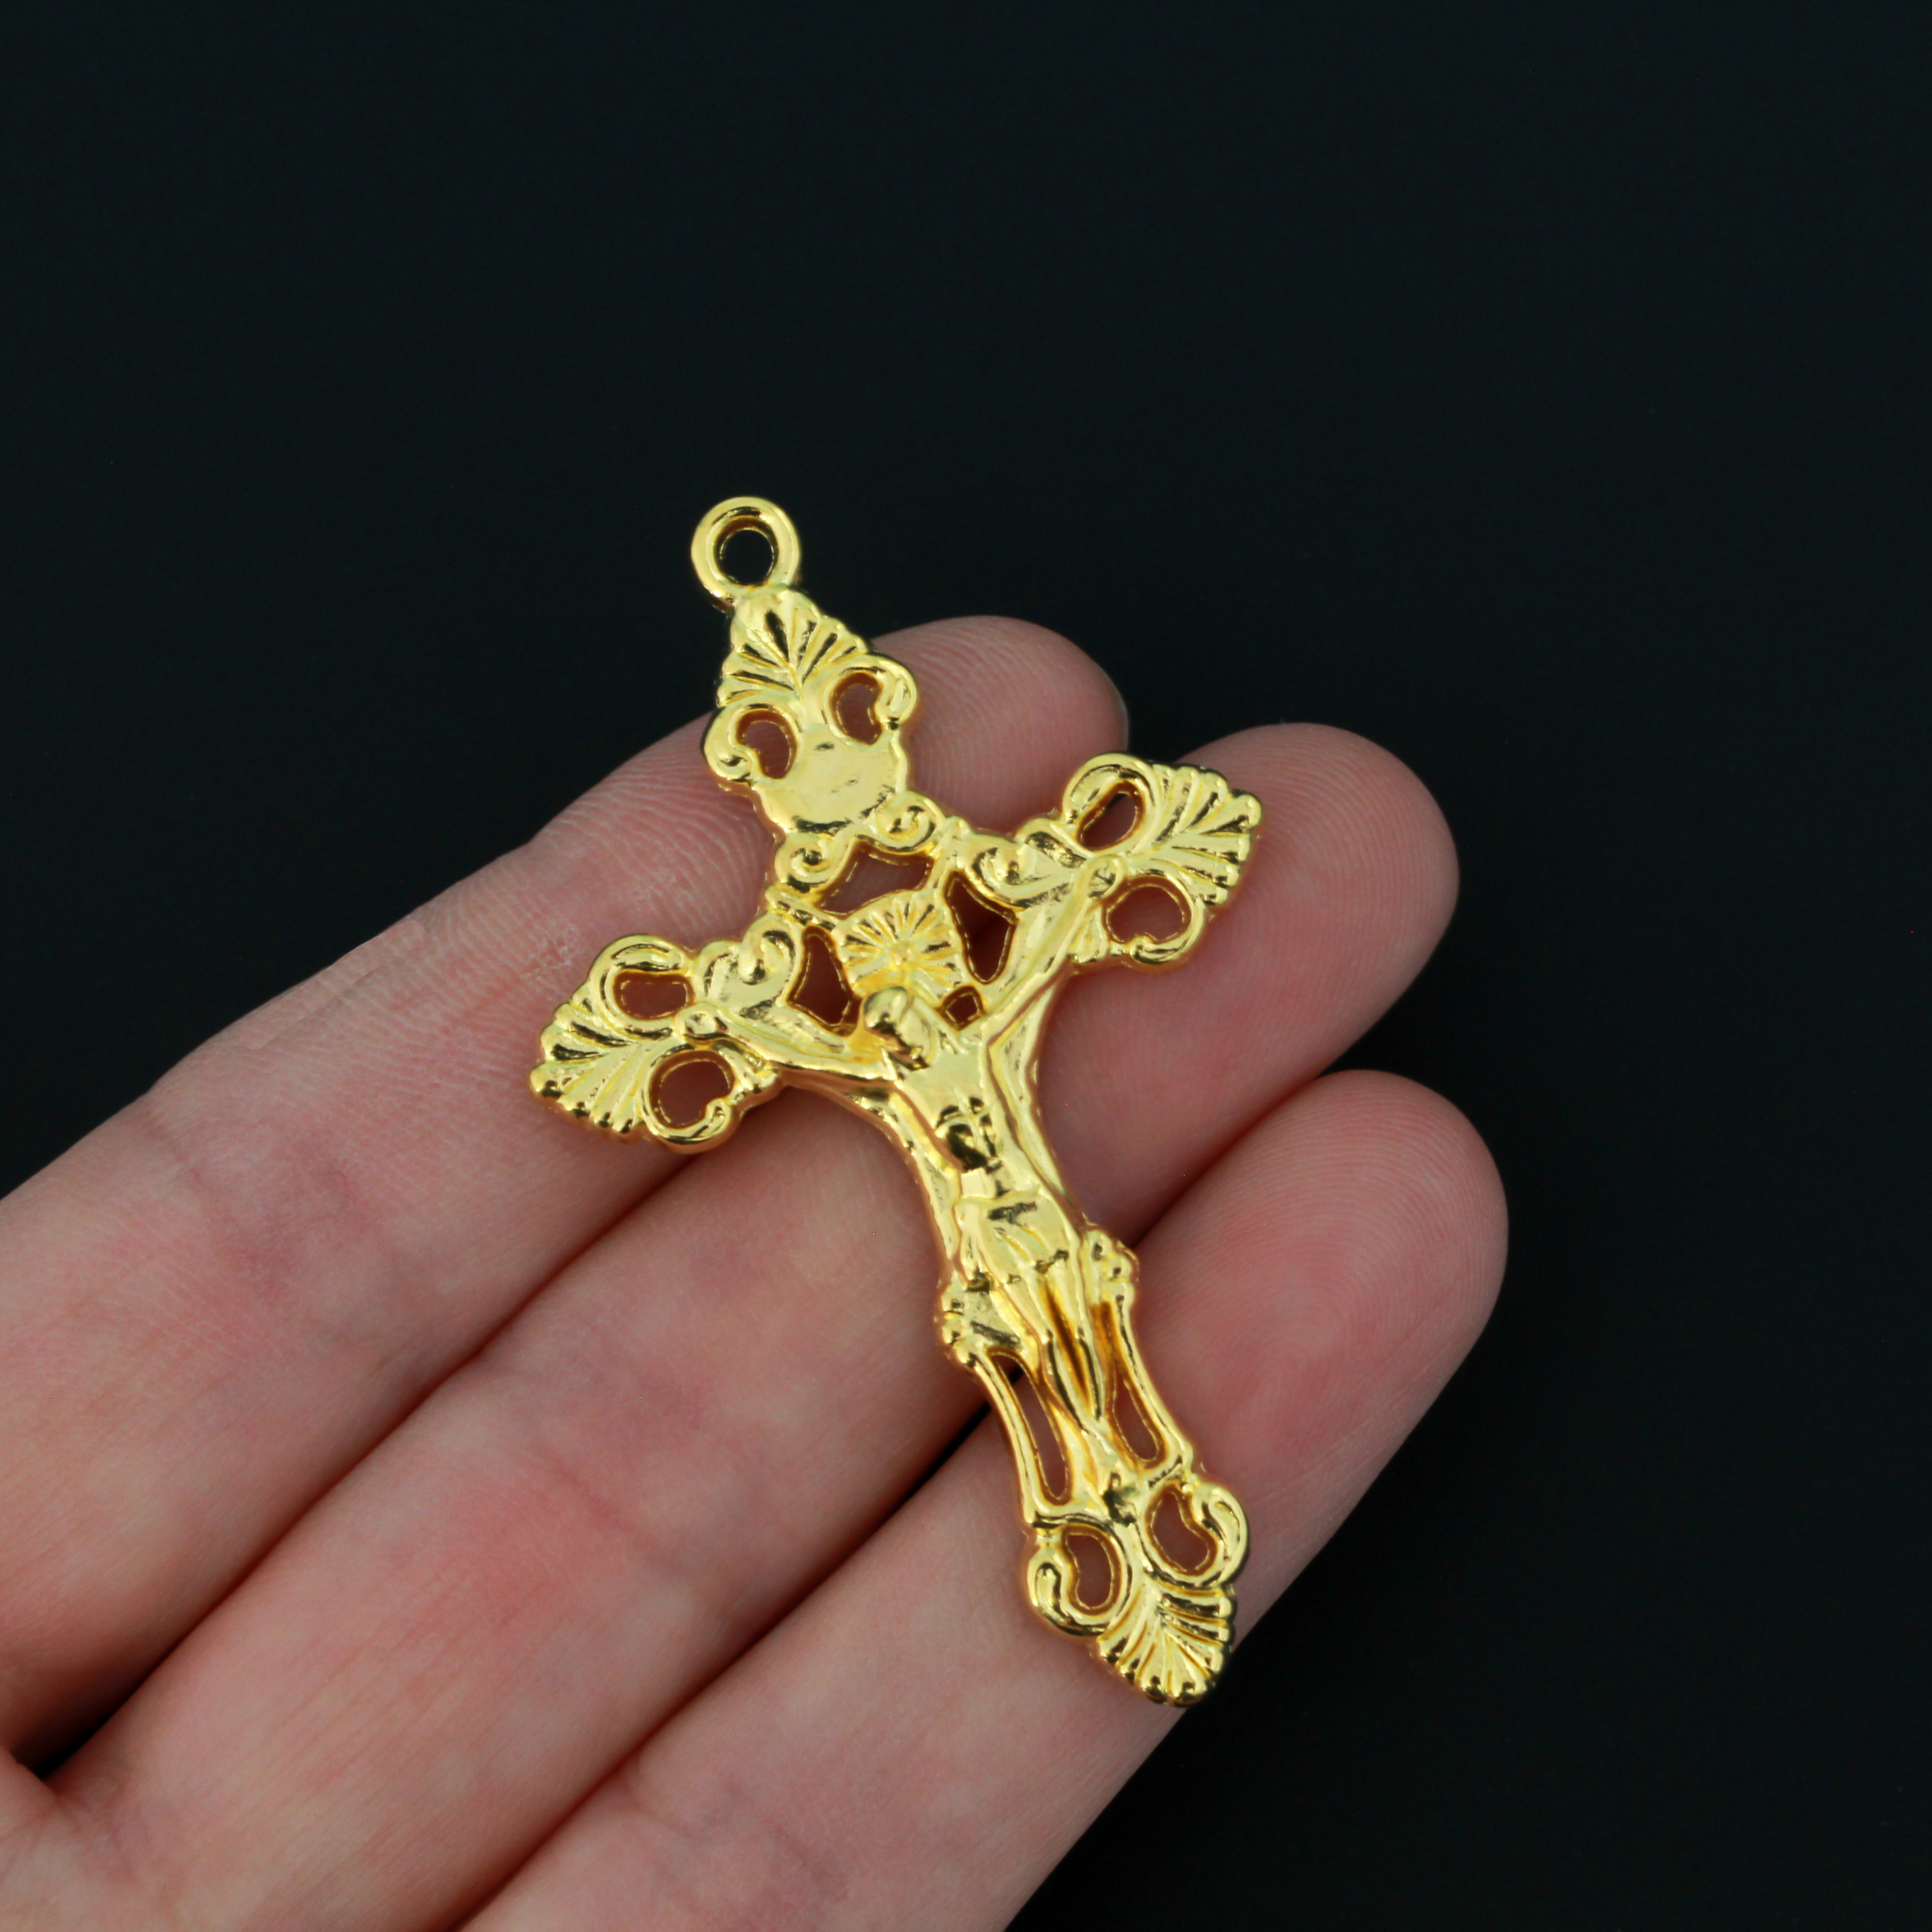 Three ornate fleur de lis crucifix cross in a shiny gold color and filigree cut out design, 2-1/8" long